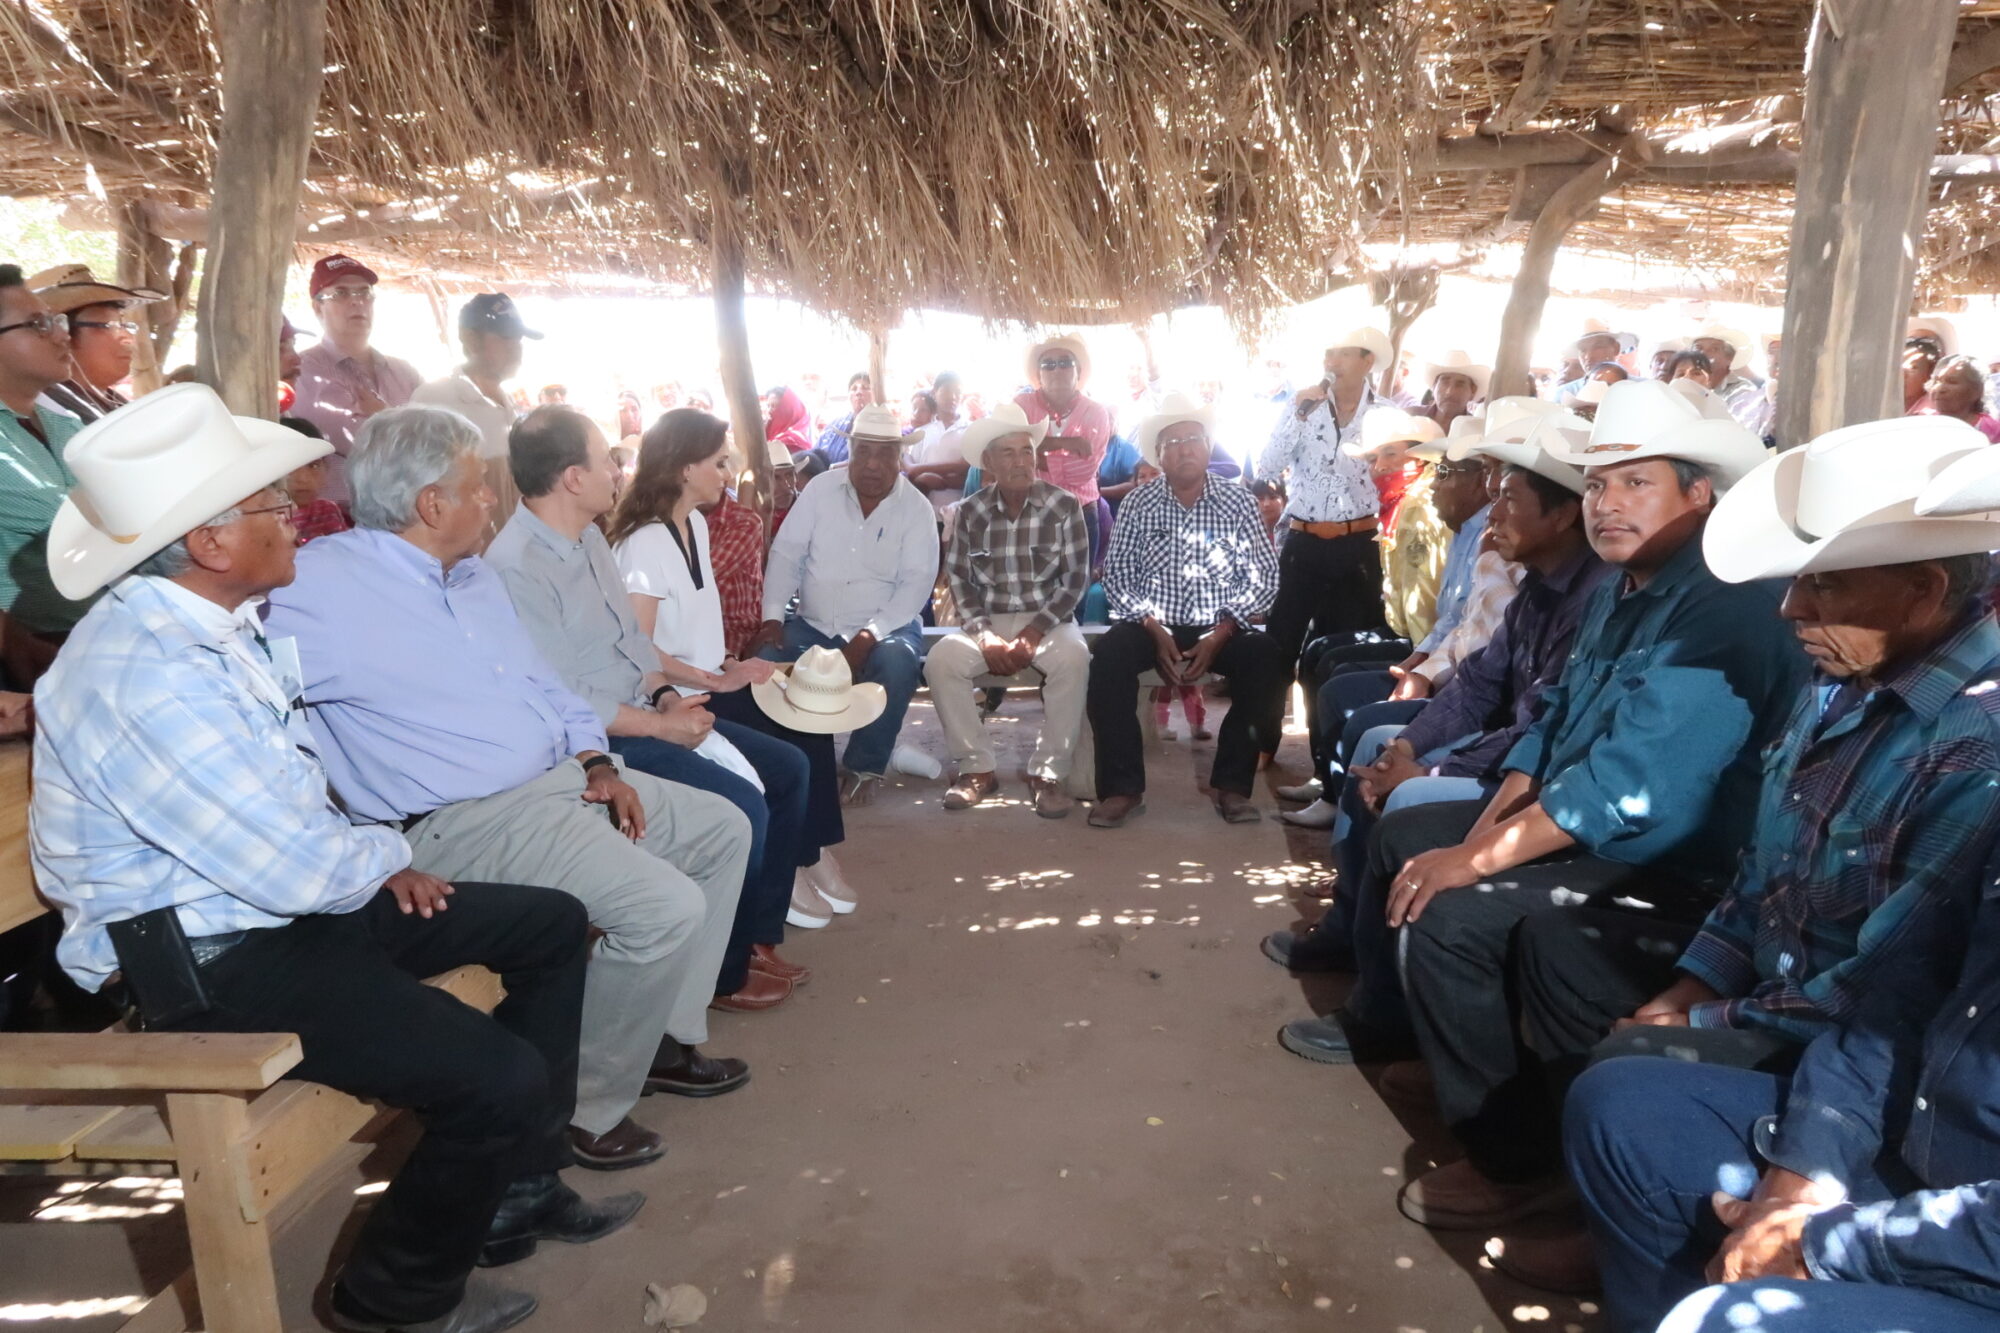 Meeting between the eight Yaqui groups and the Mexican government